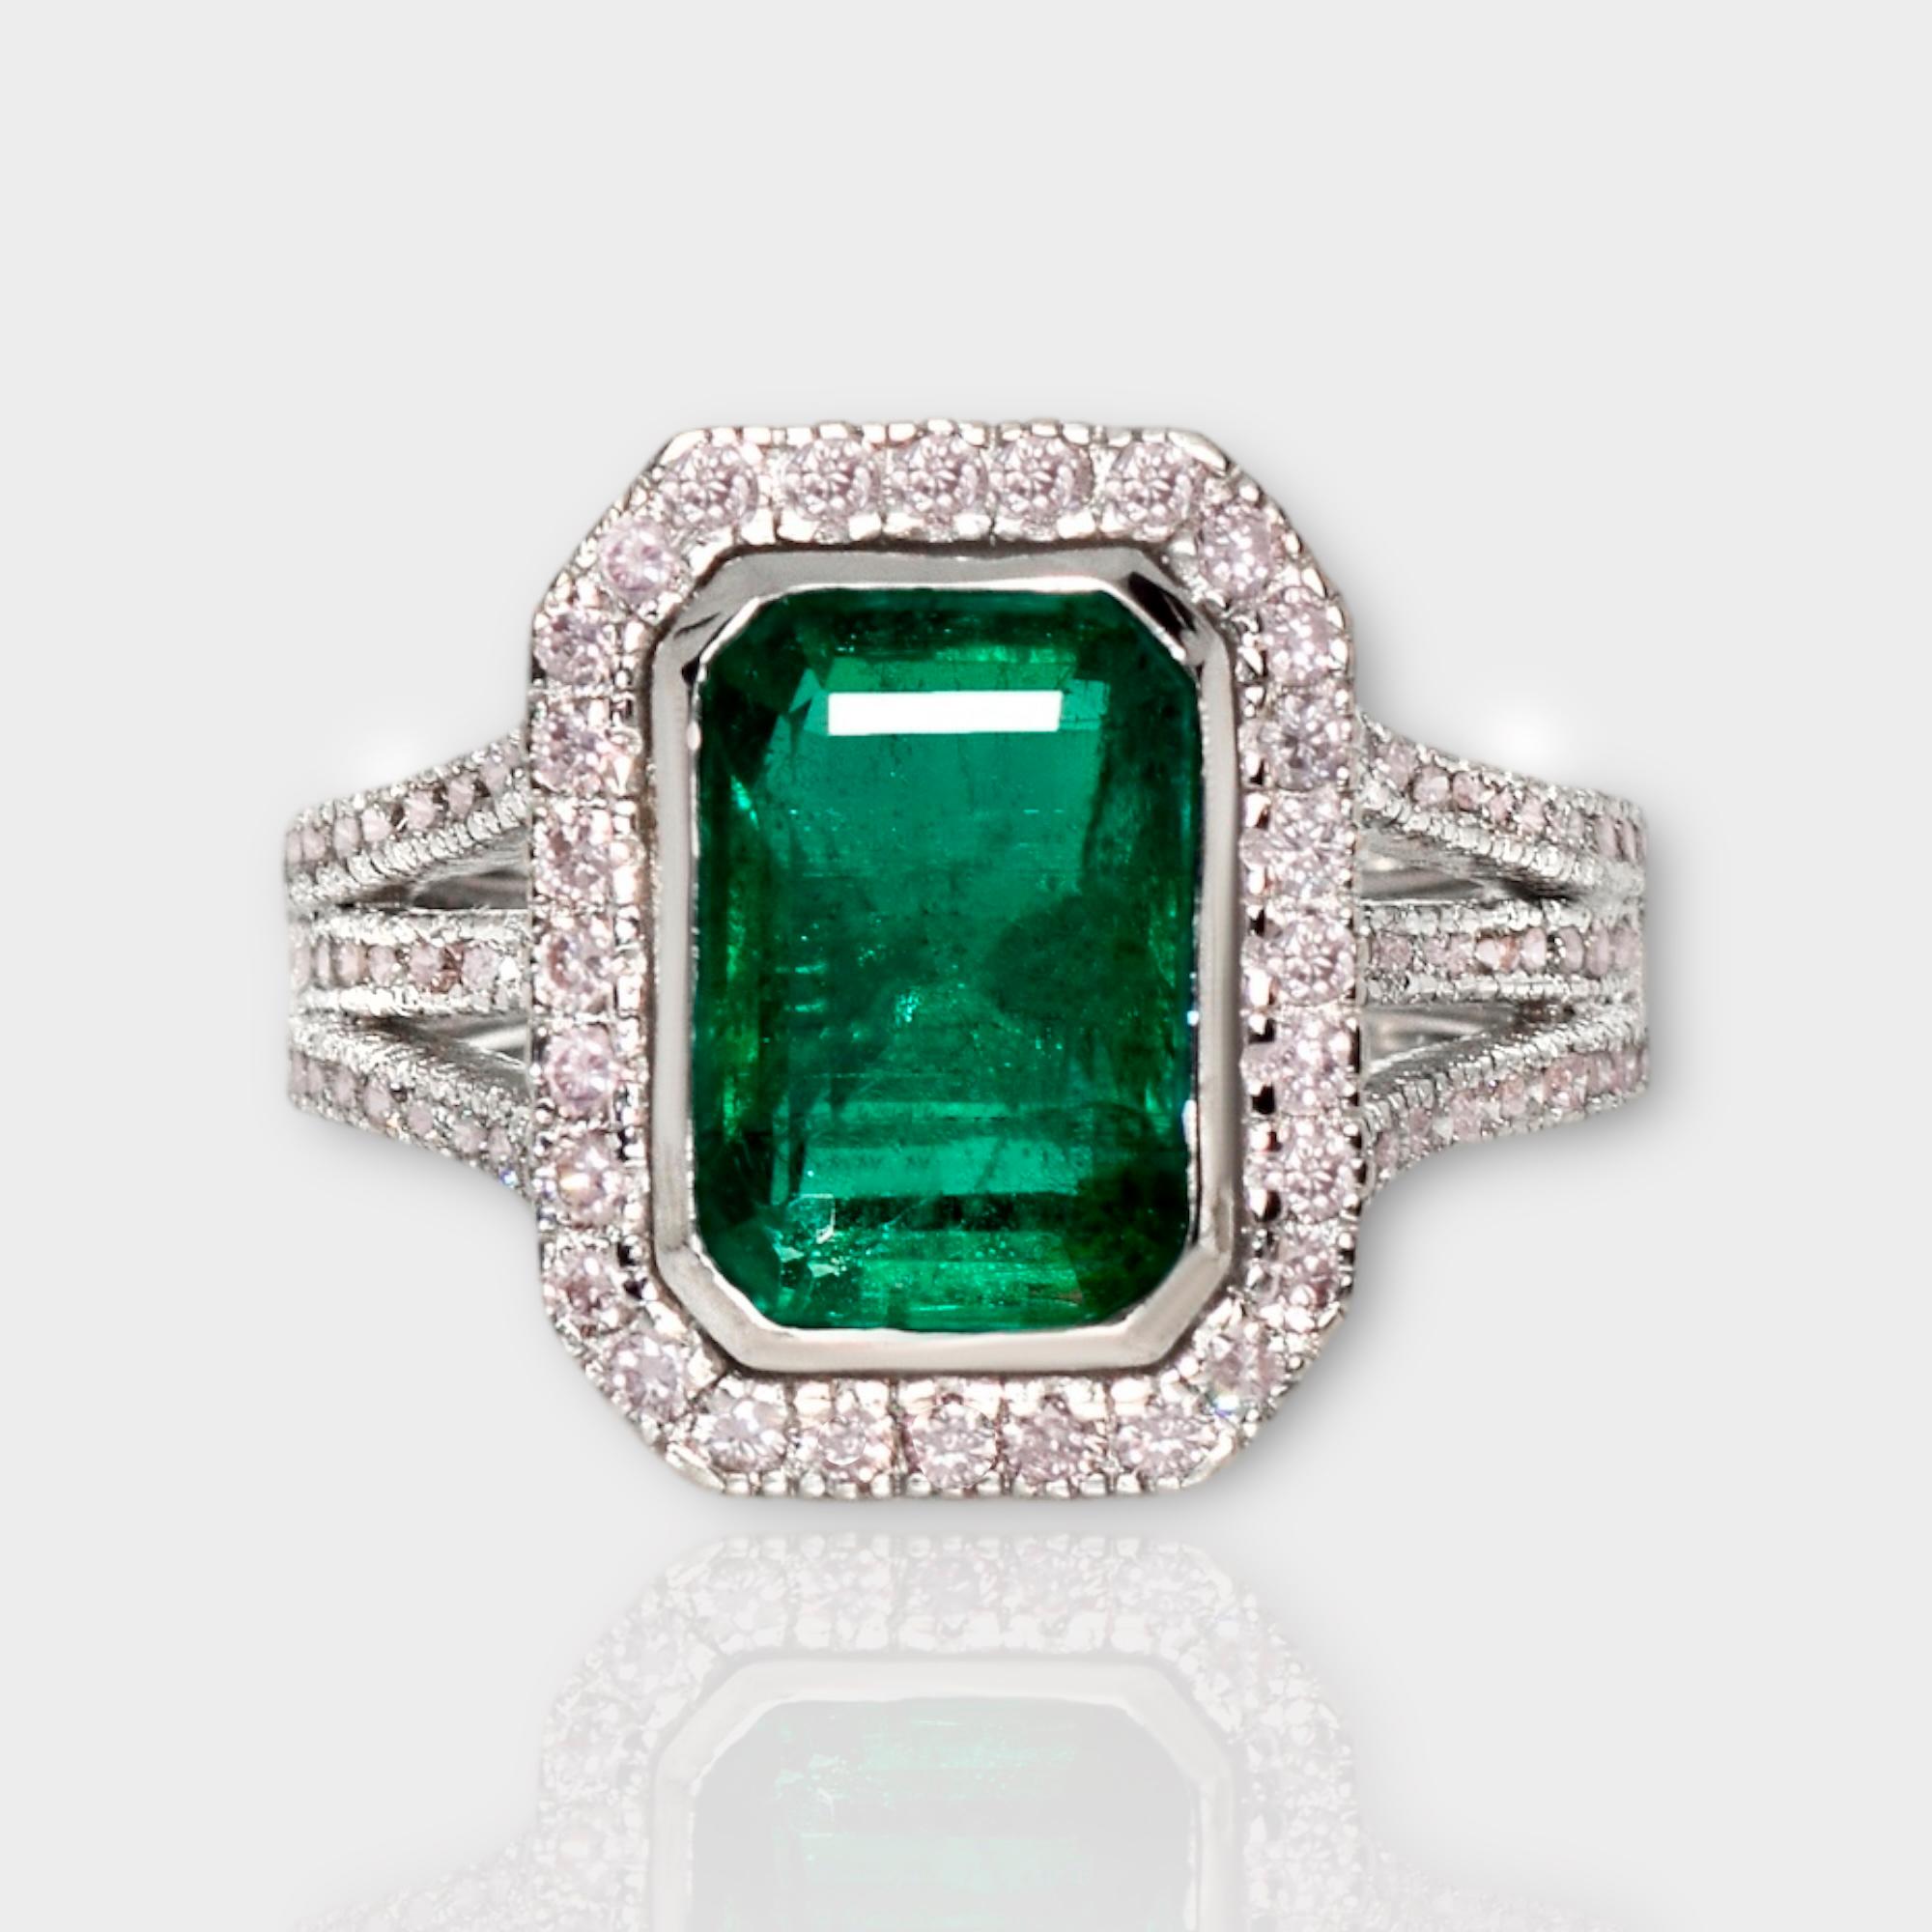 **IGI 18K White Gold 3.35 ct Emerald&Pink Diamonds Antique Art Deco Style Engagement Ring** 

An IGI-certified natural Zambia green emerald weighing 3.35 ct is set on an 18K white gold arc deco design band with natural pink diamonds weighing 0.69